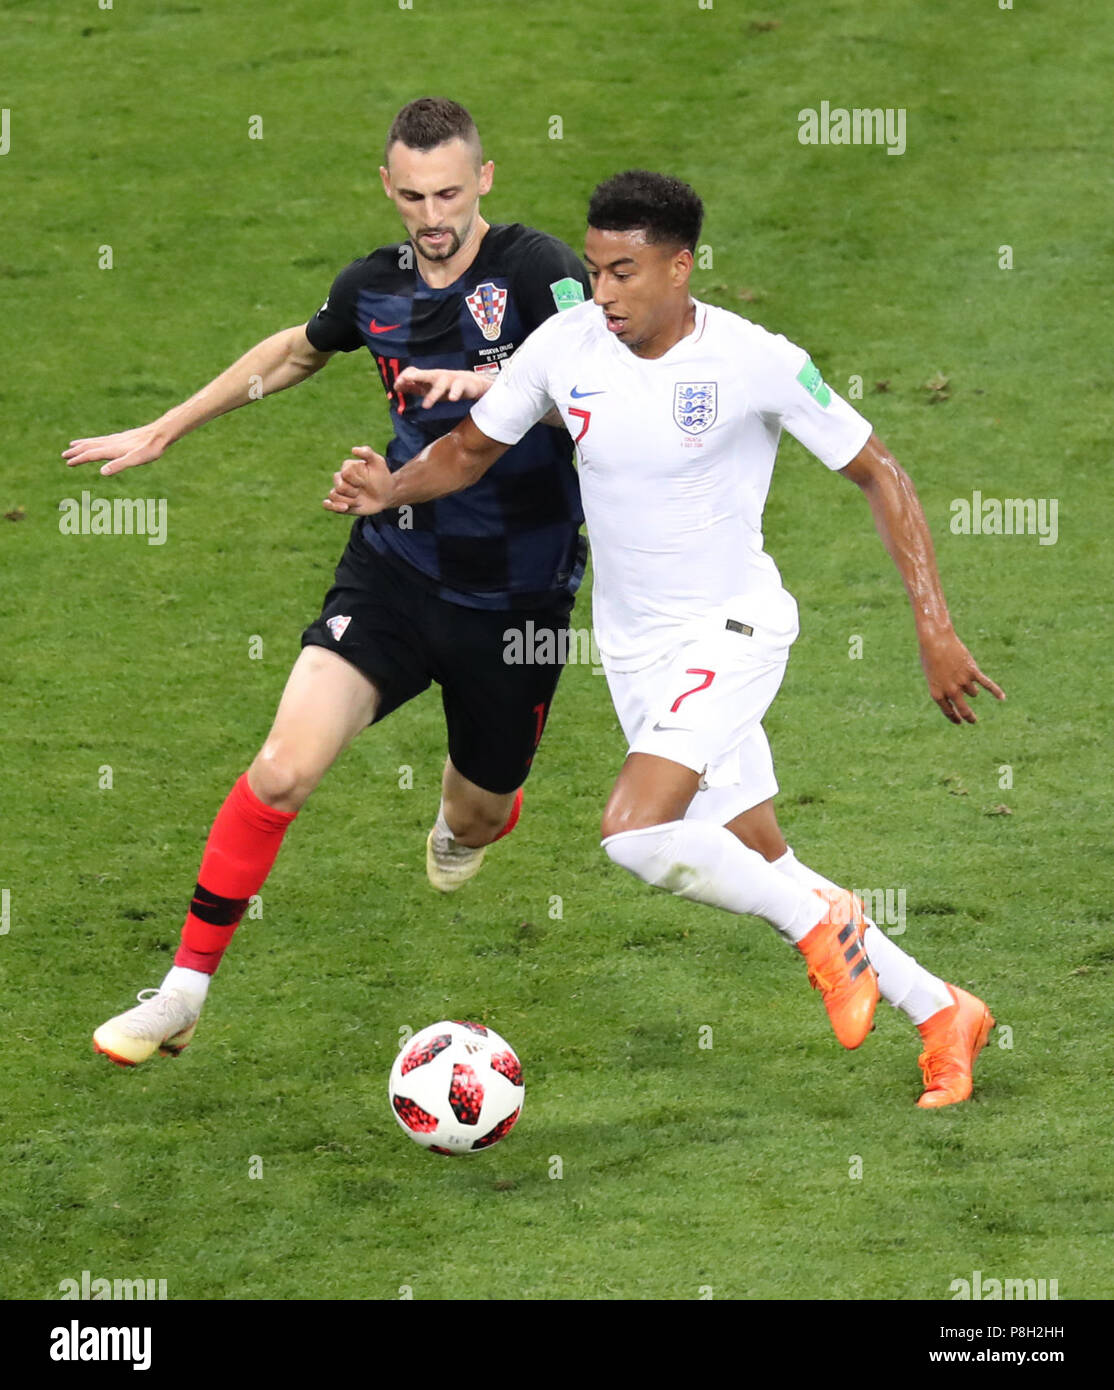 Moscow, Russia. 11th July, 2018. Jesse Lingard (R) of England vies with Marcelo Brozovic of Croatia during the 2018 FIFA World Cup semi-final match between England and Croatia in Moscow, Russia, July 11, 2018. Credit: Bai Xueqi/Xinhua/Alamy Live News Stock Photo